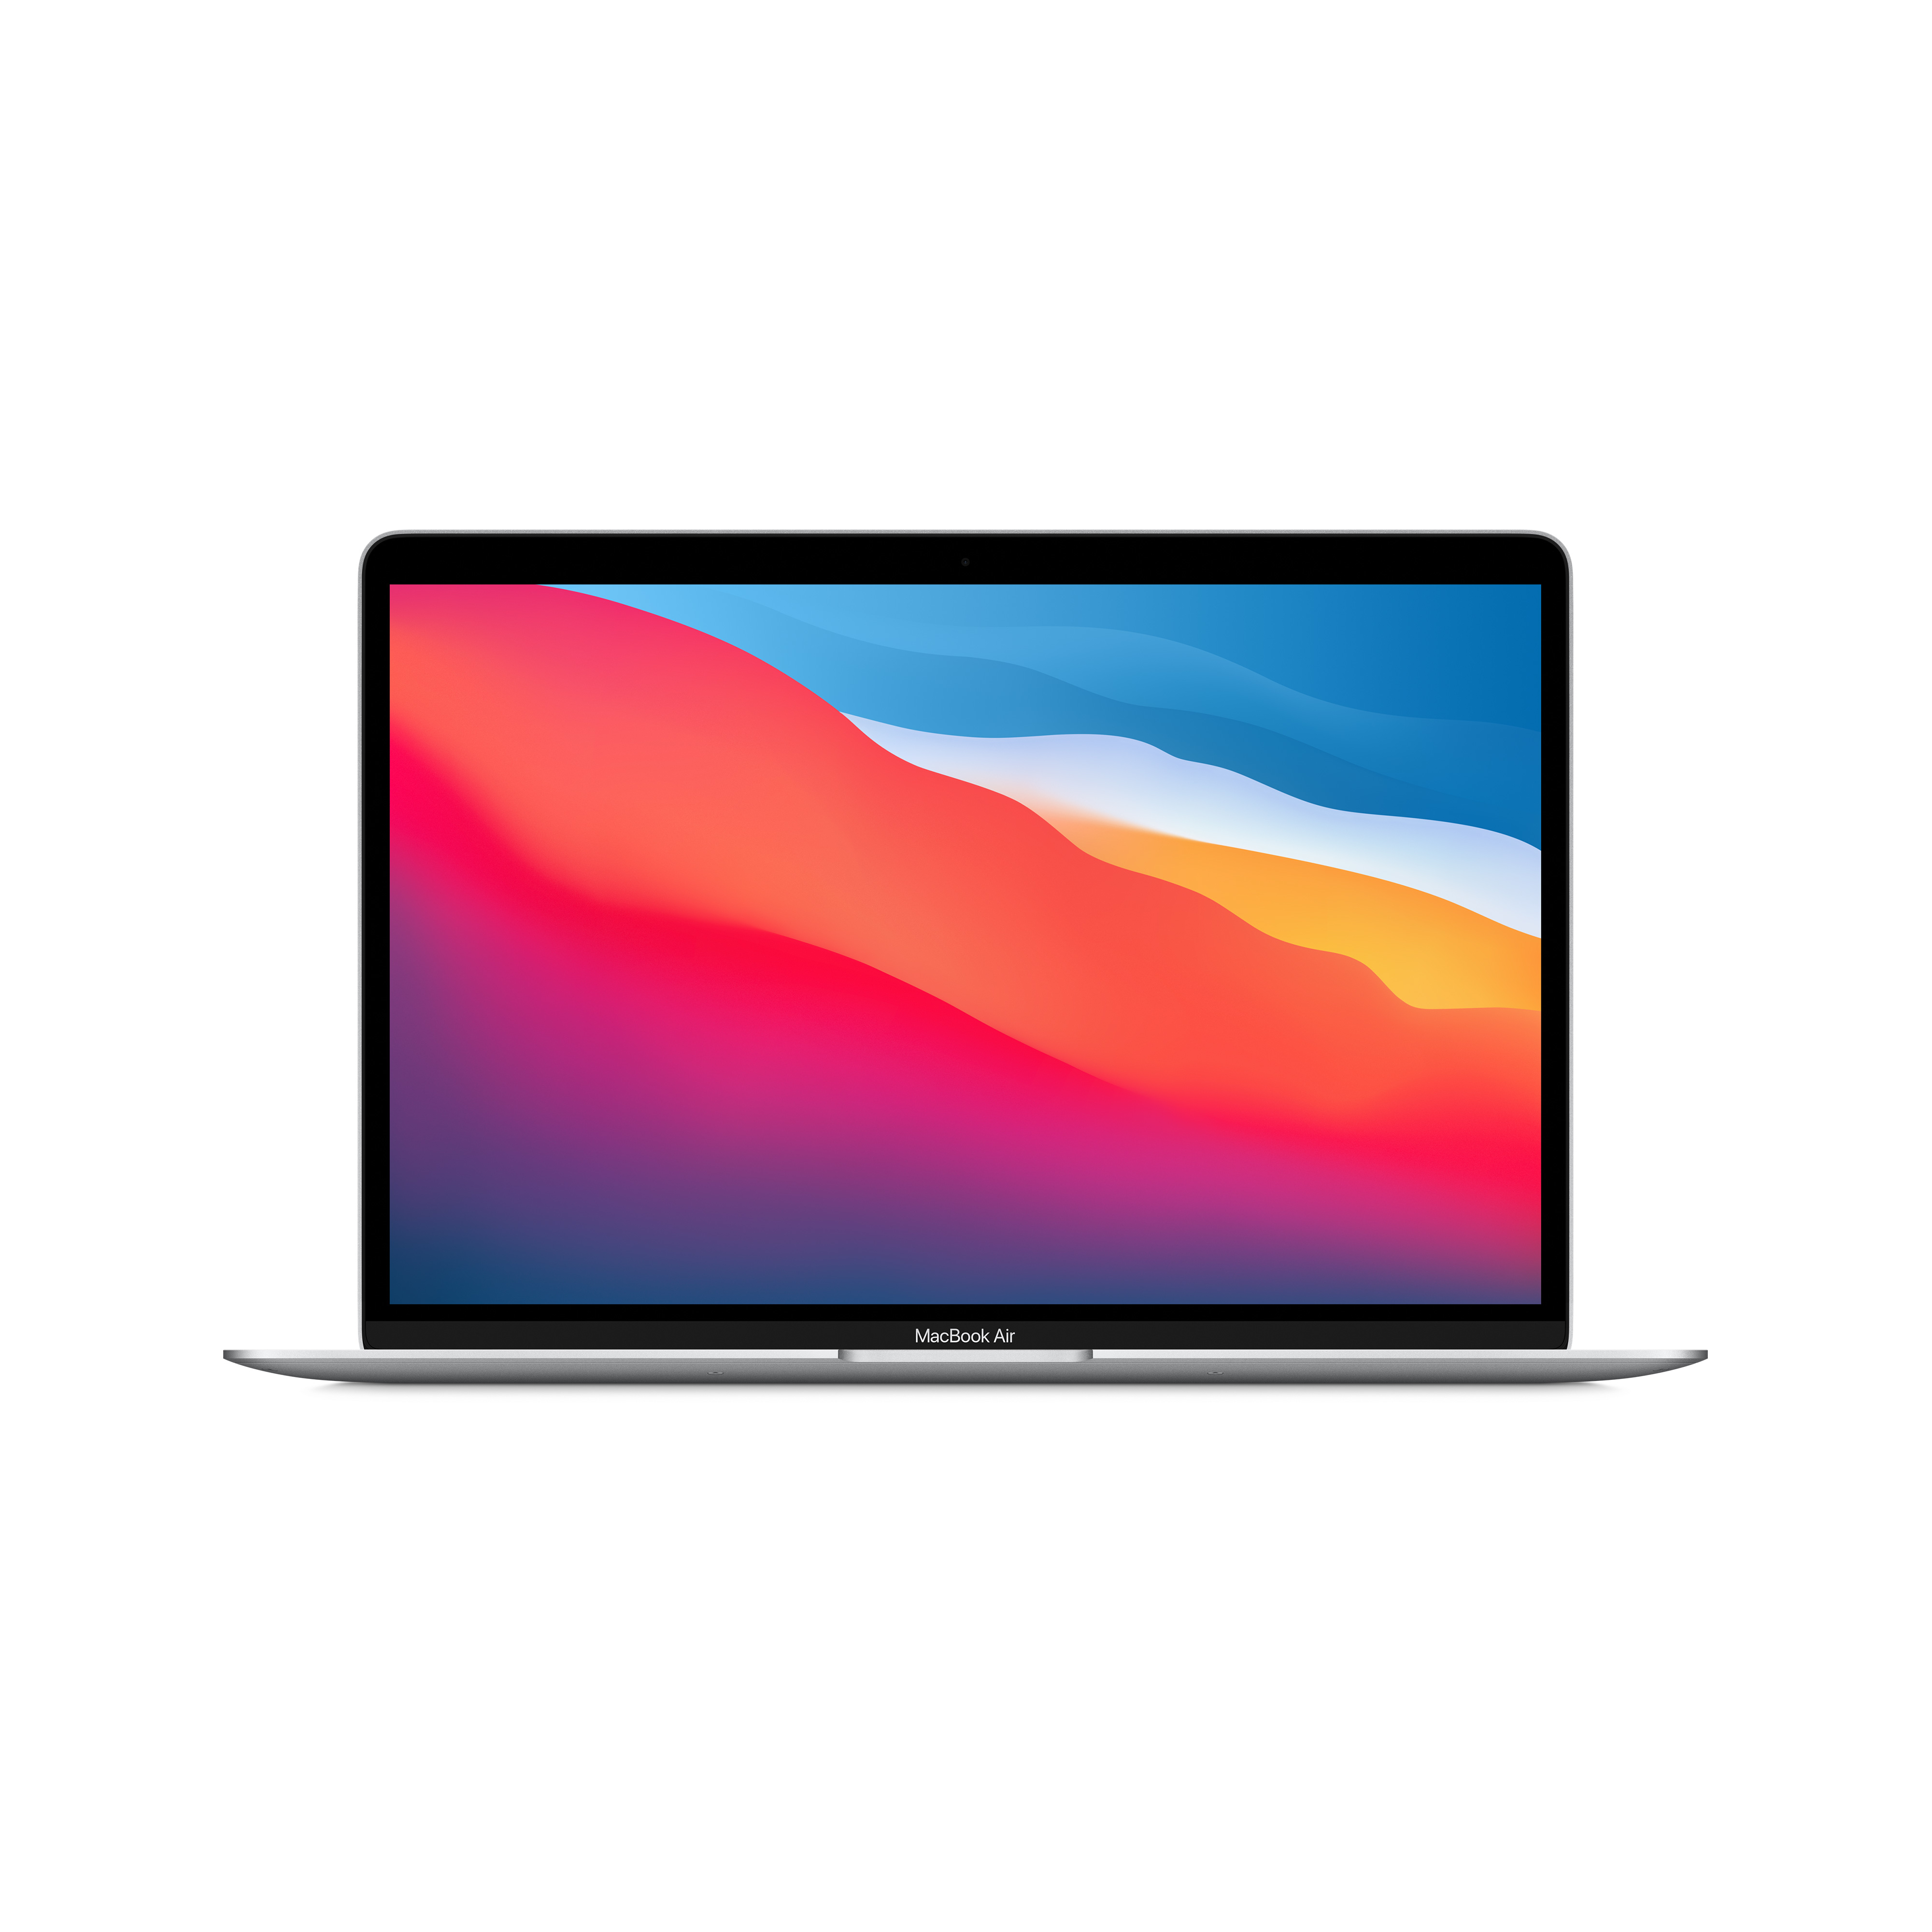  13inch (2020) MacBook Air:  M1 chip with 8core CPU and 7core GPU 256GB Silver Qwerty